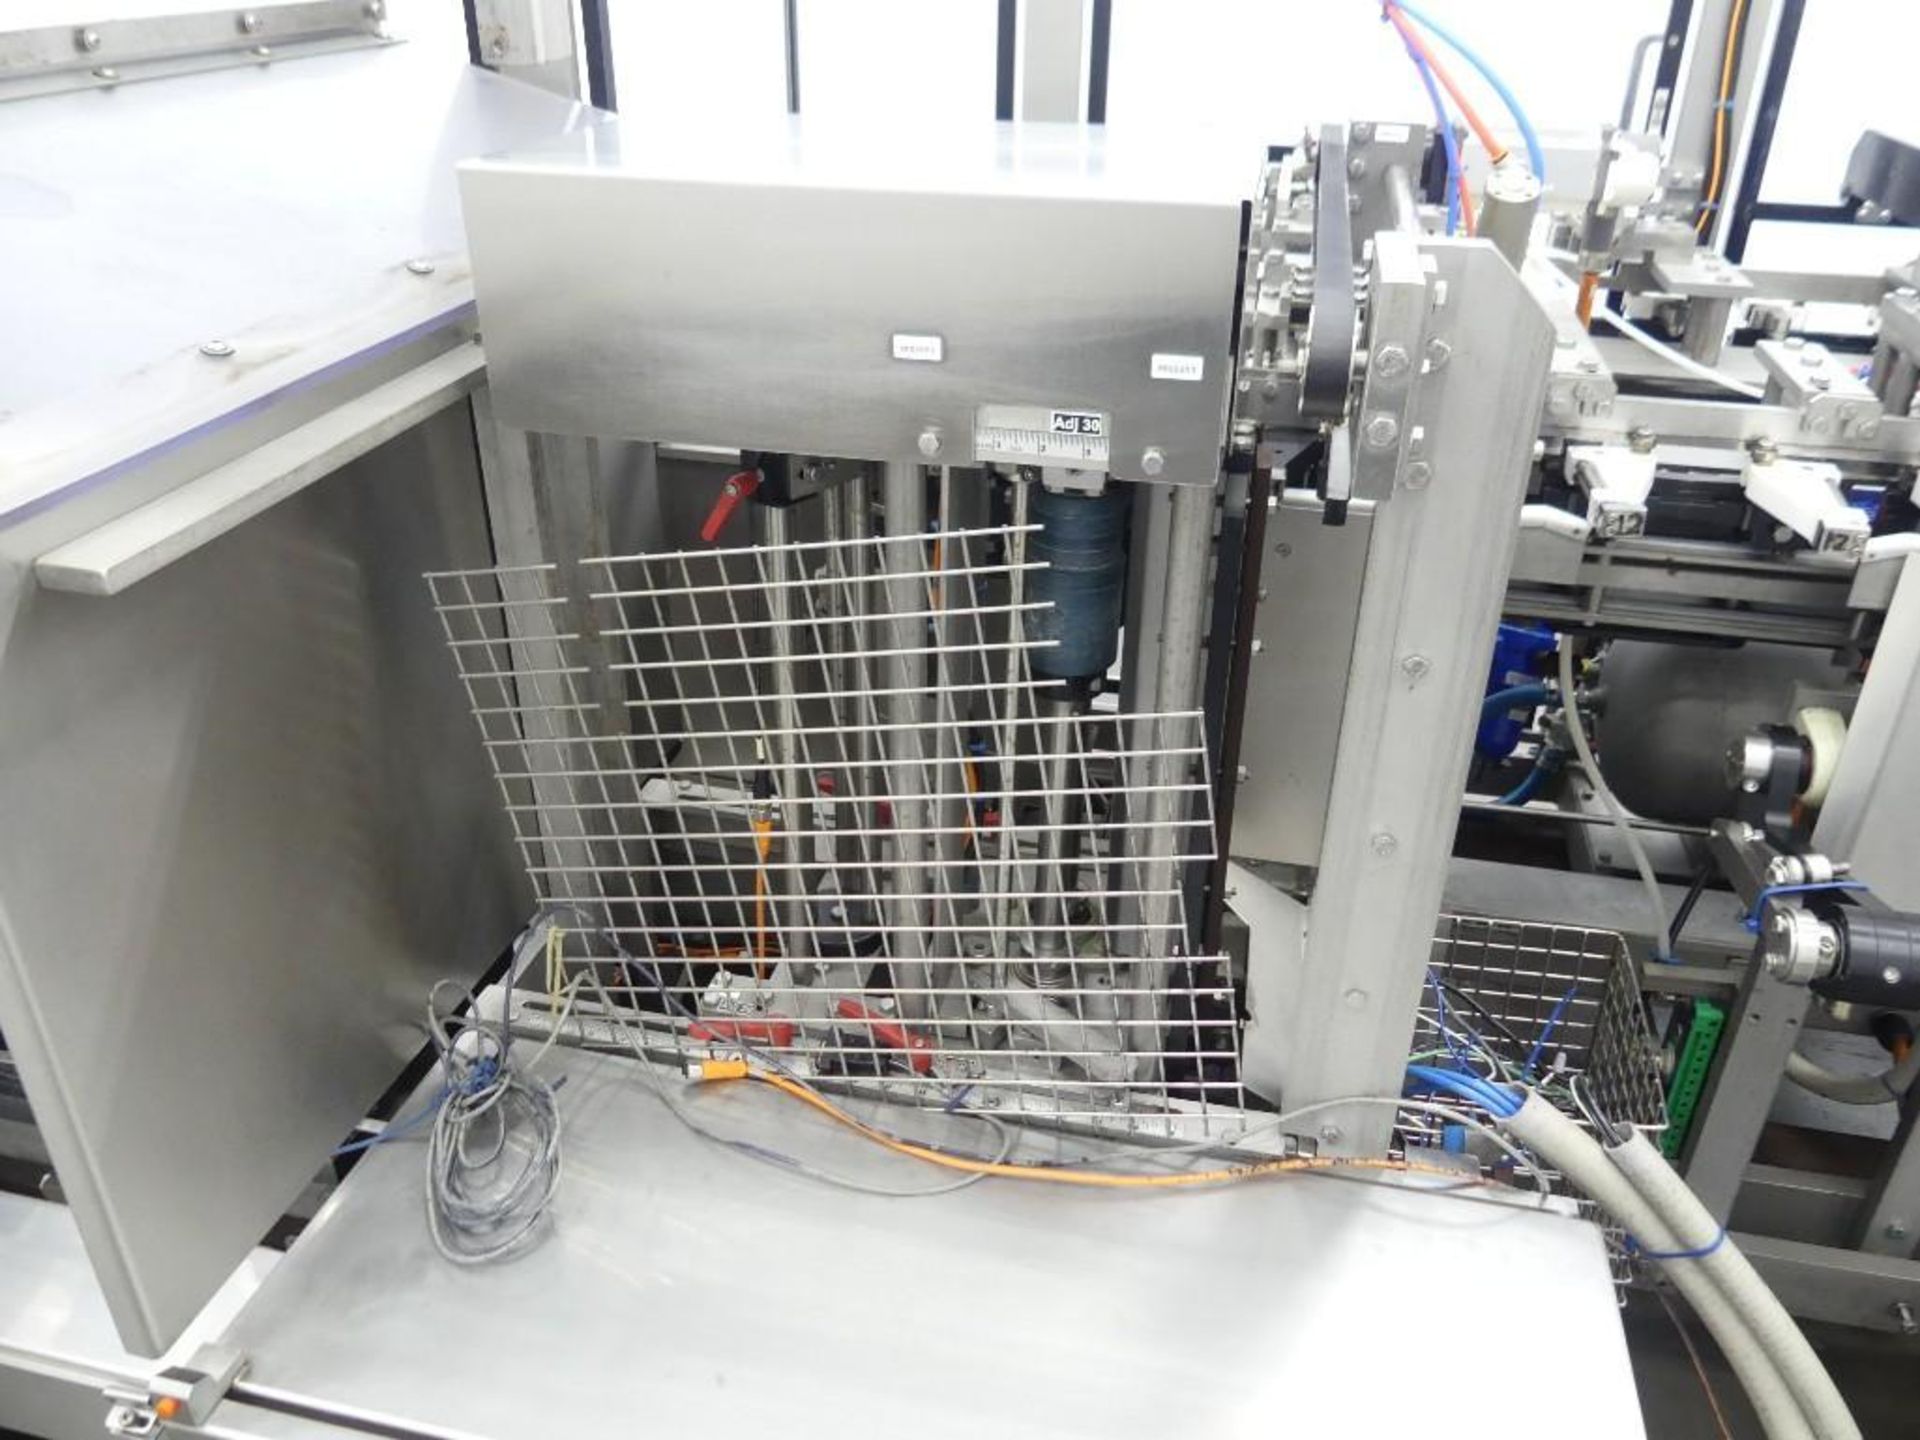 Massman HFFS-IM1000 Flexible Pouch Packaging System - Image 21 of 127